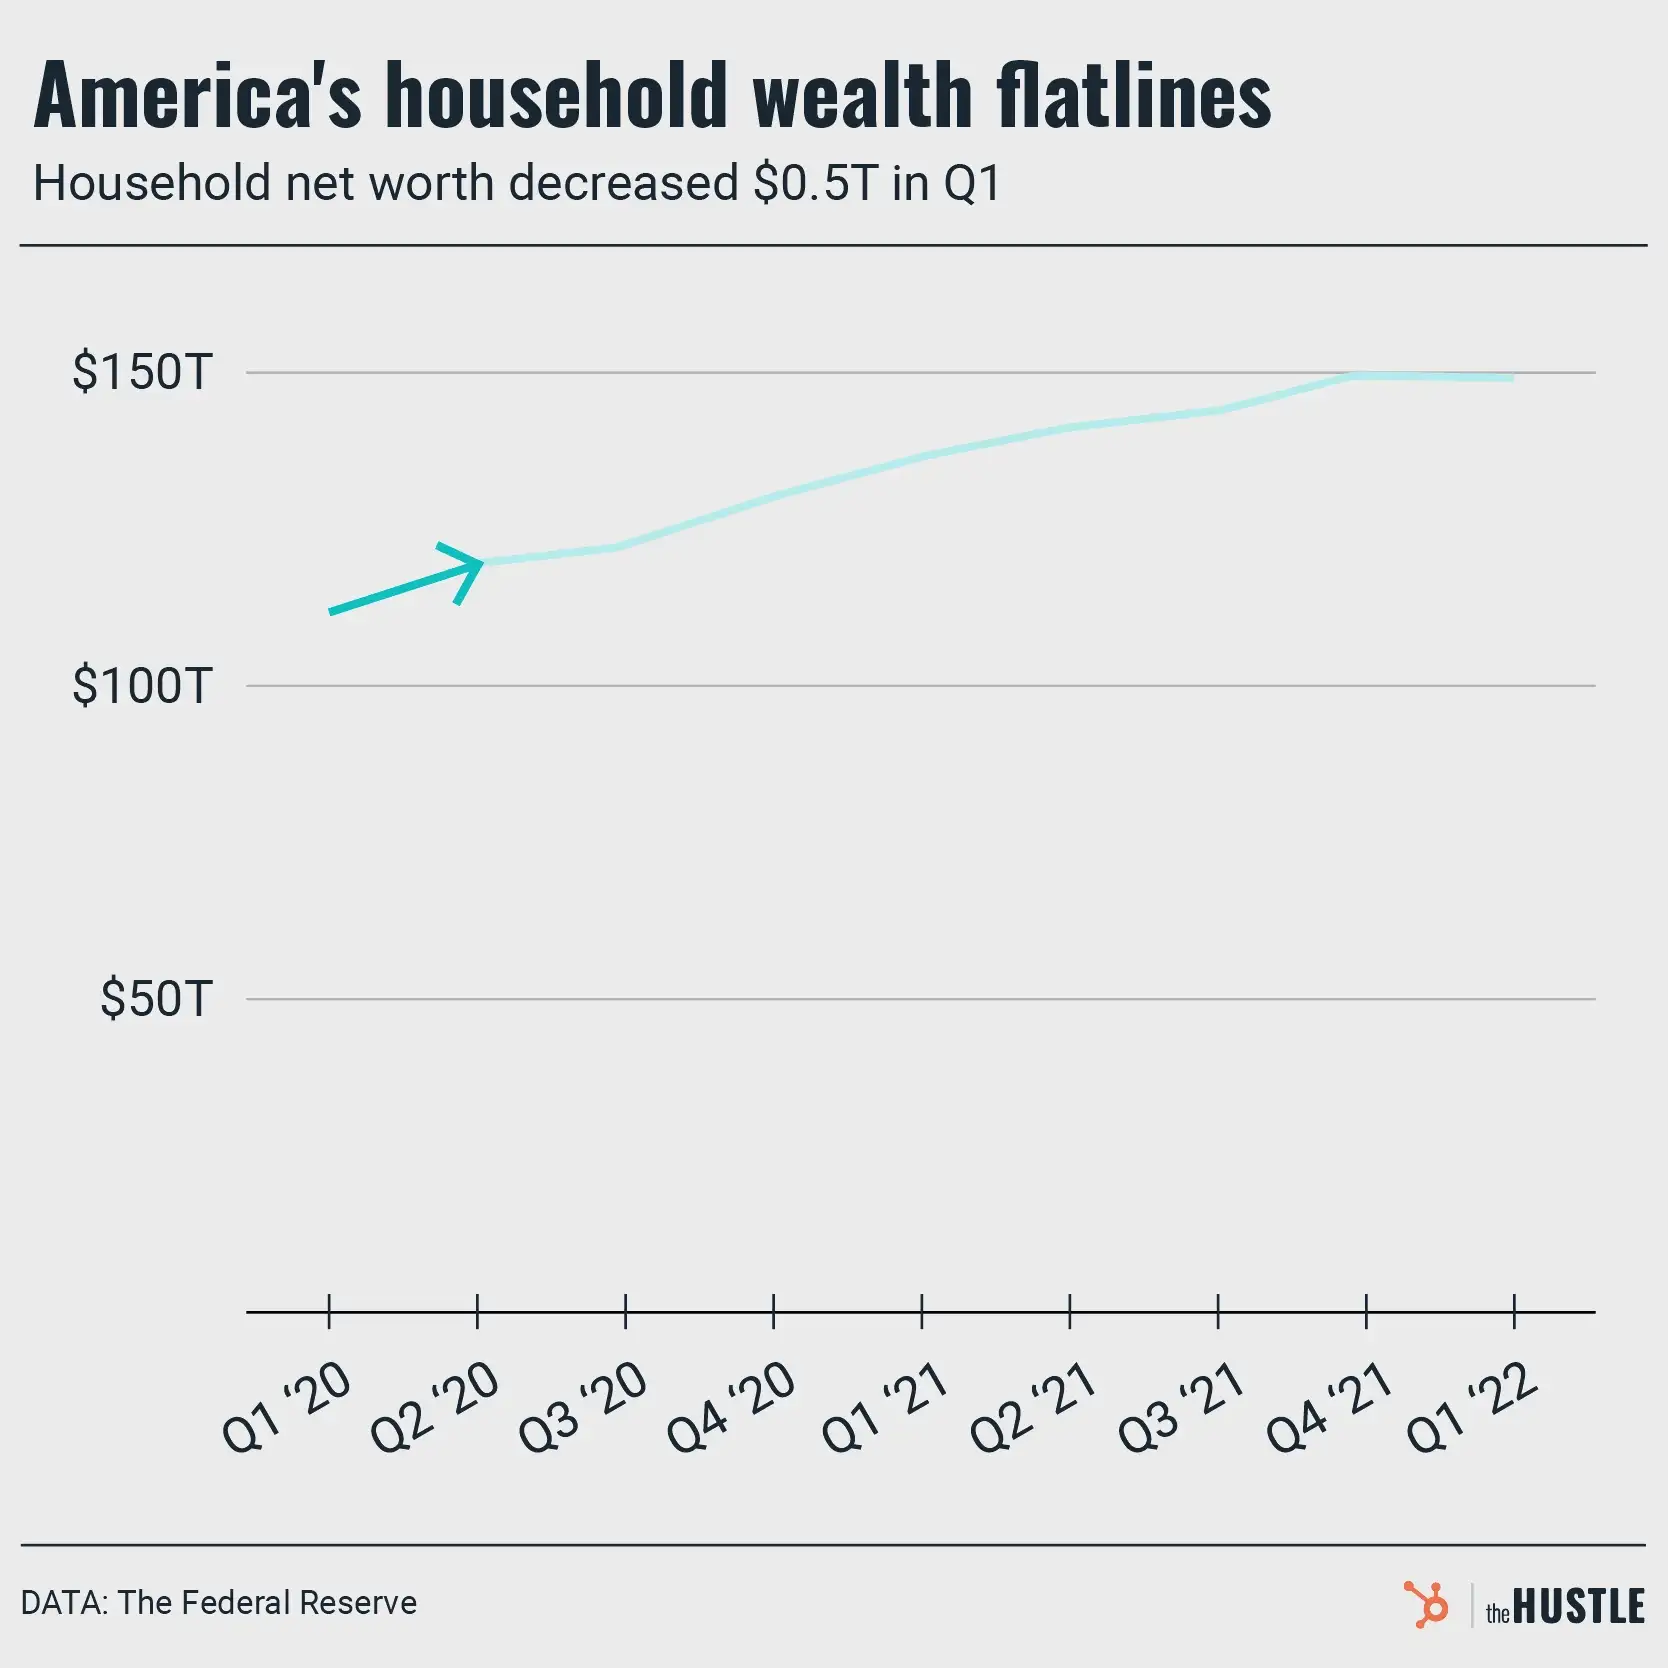 US household wealth hits a snag